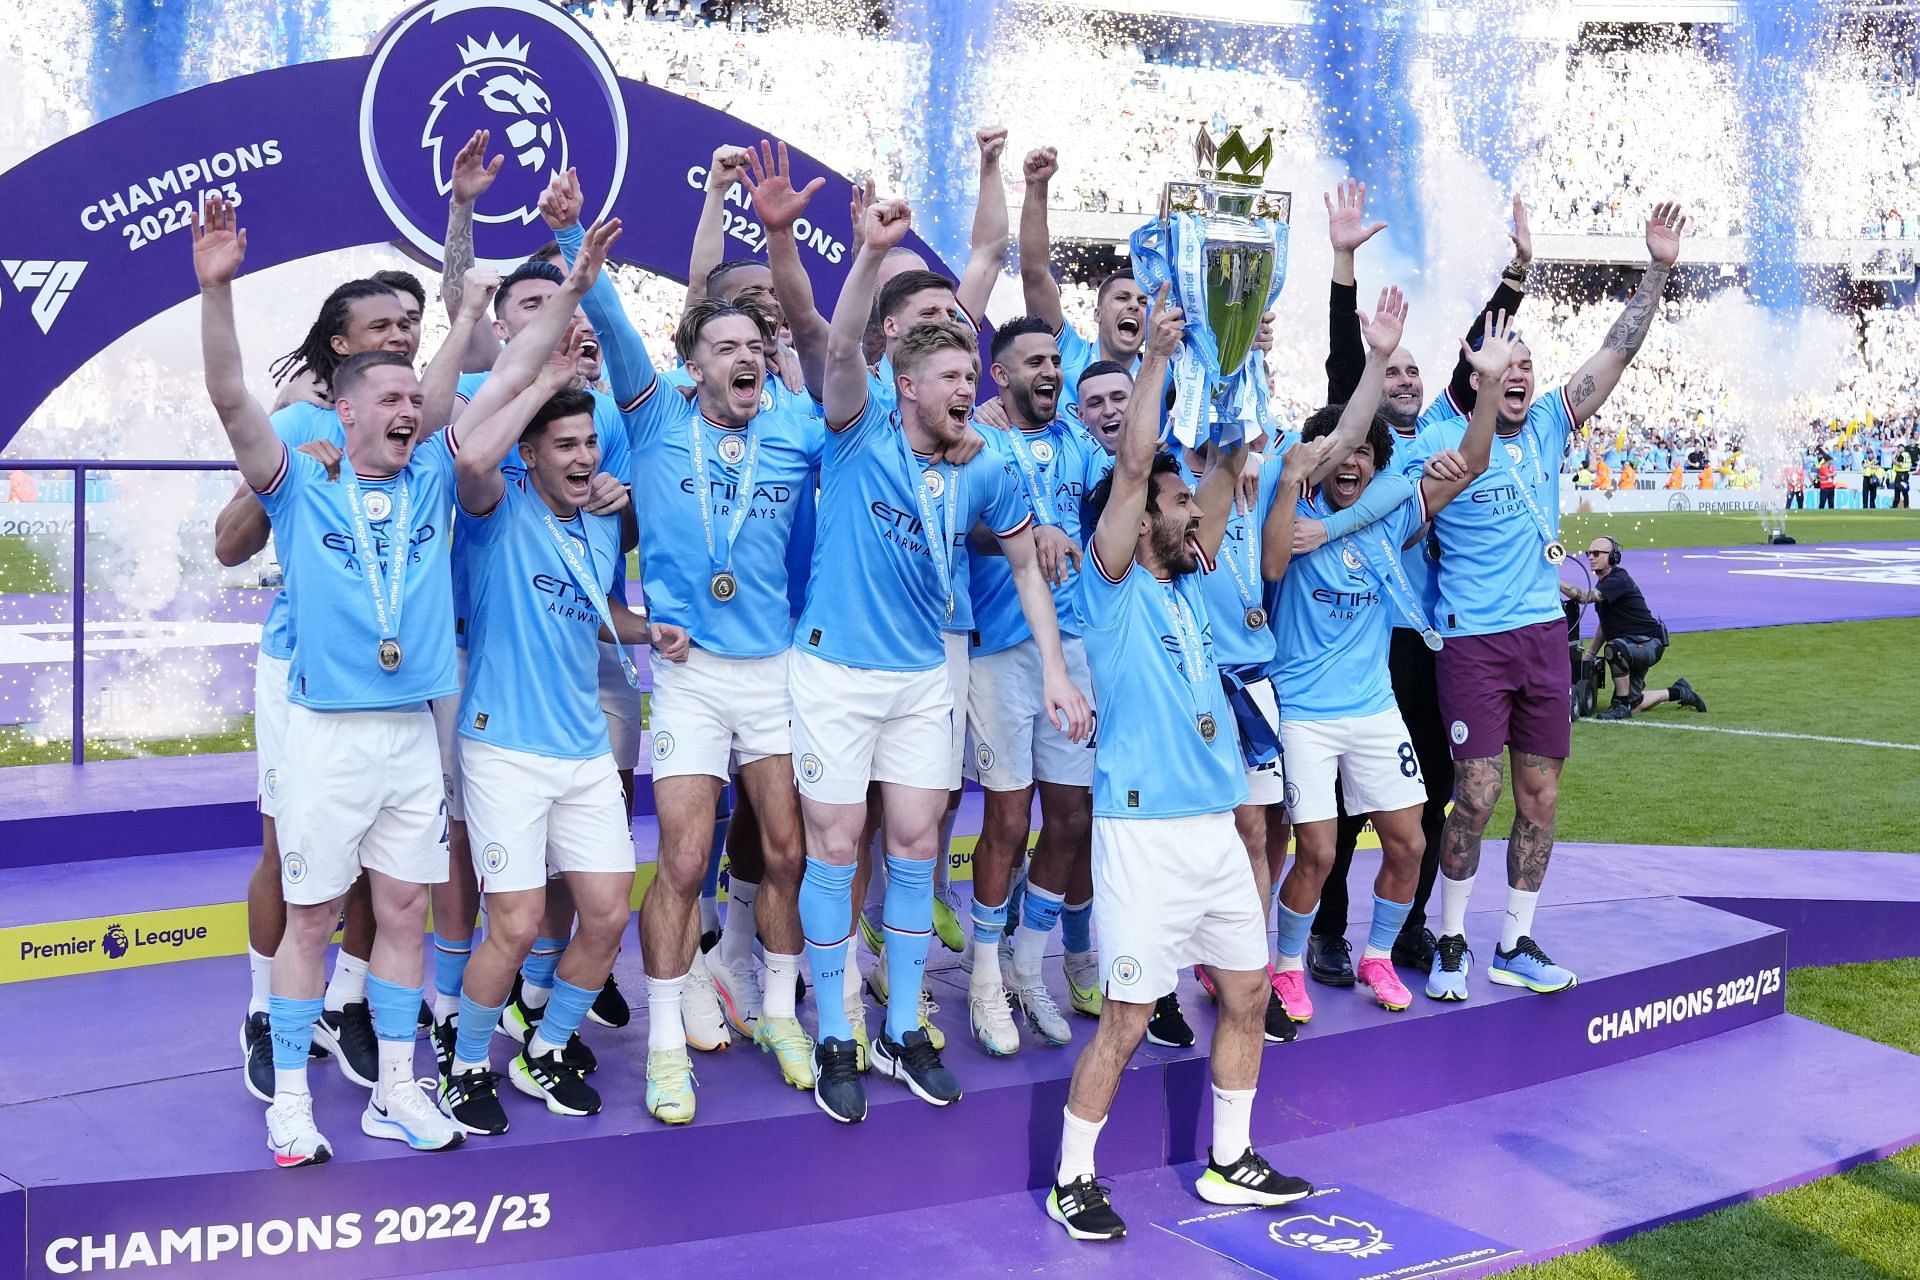 Manchester City won the competition last season.